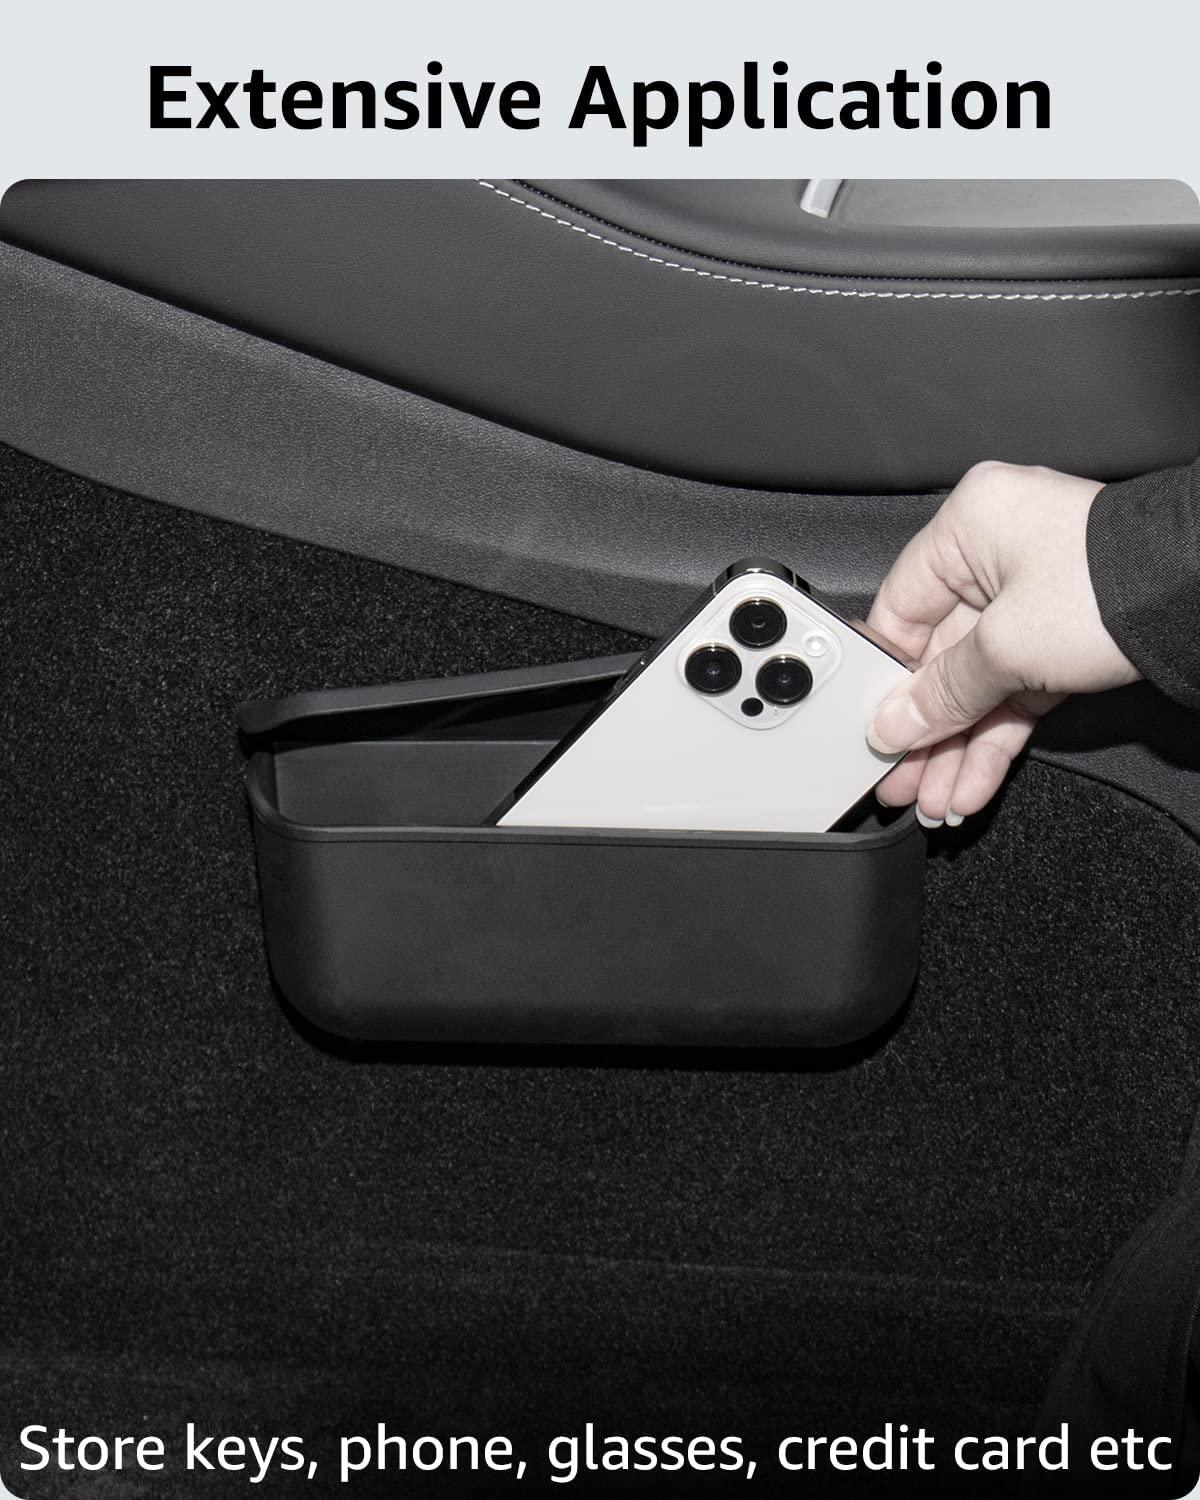 Sunglass Case ( A Pair) For Model 3/Y - TESLOVERY